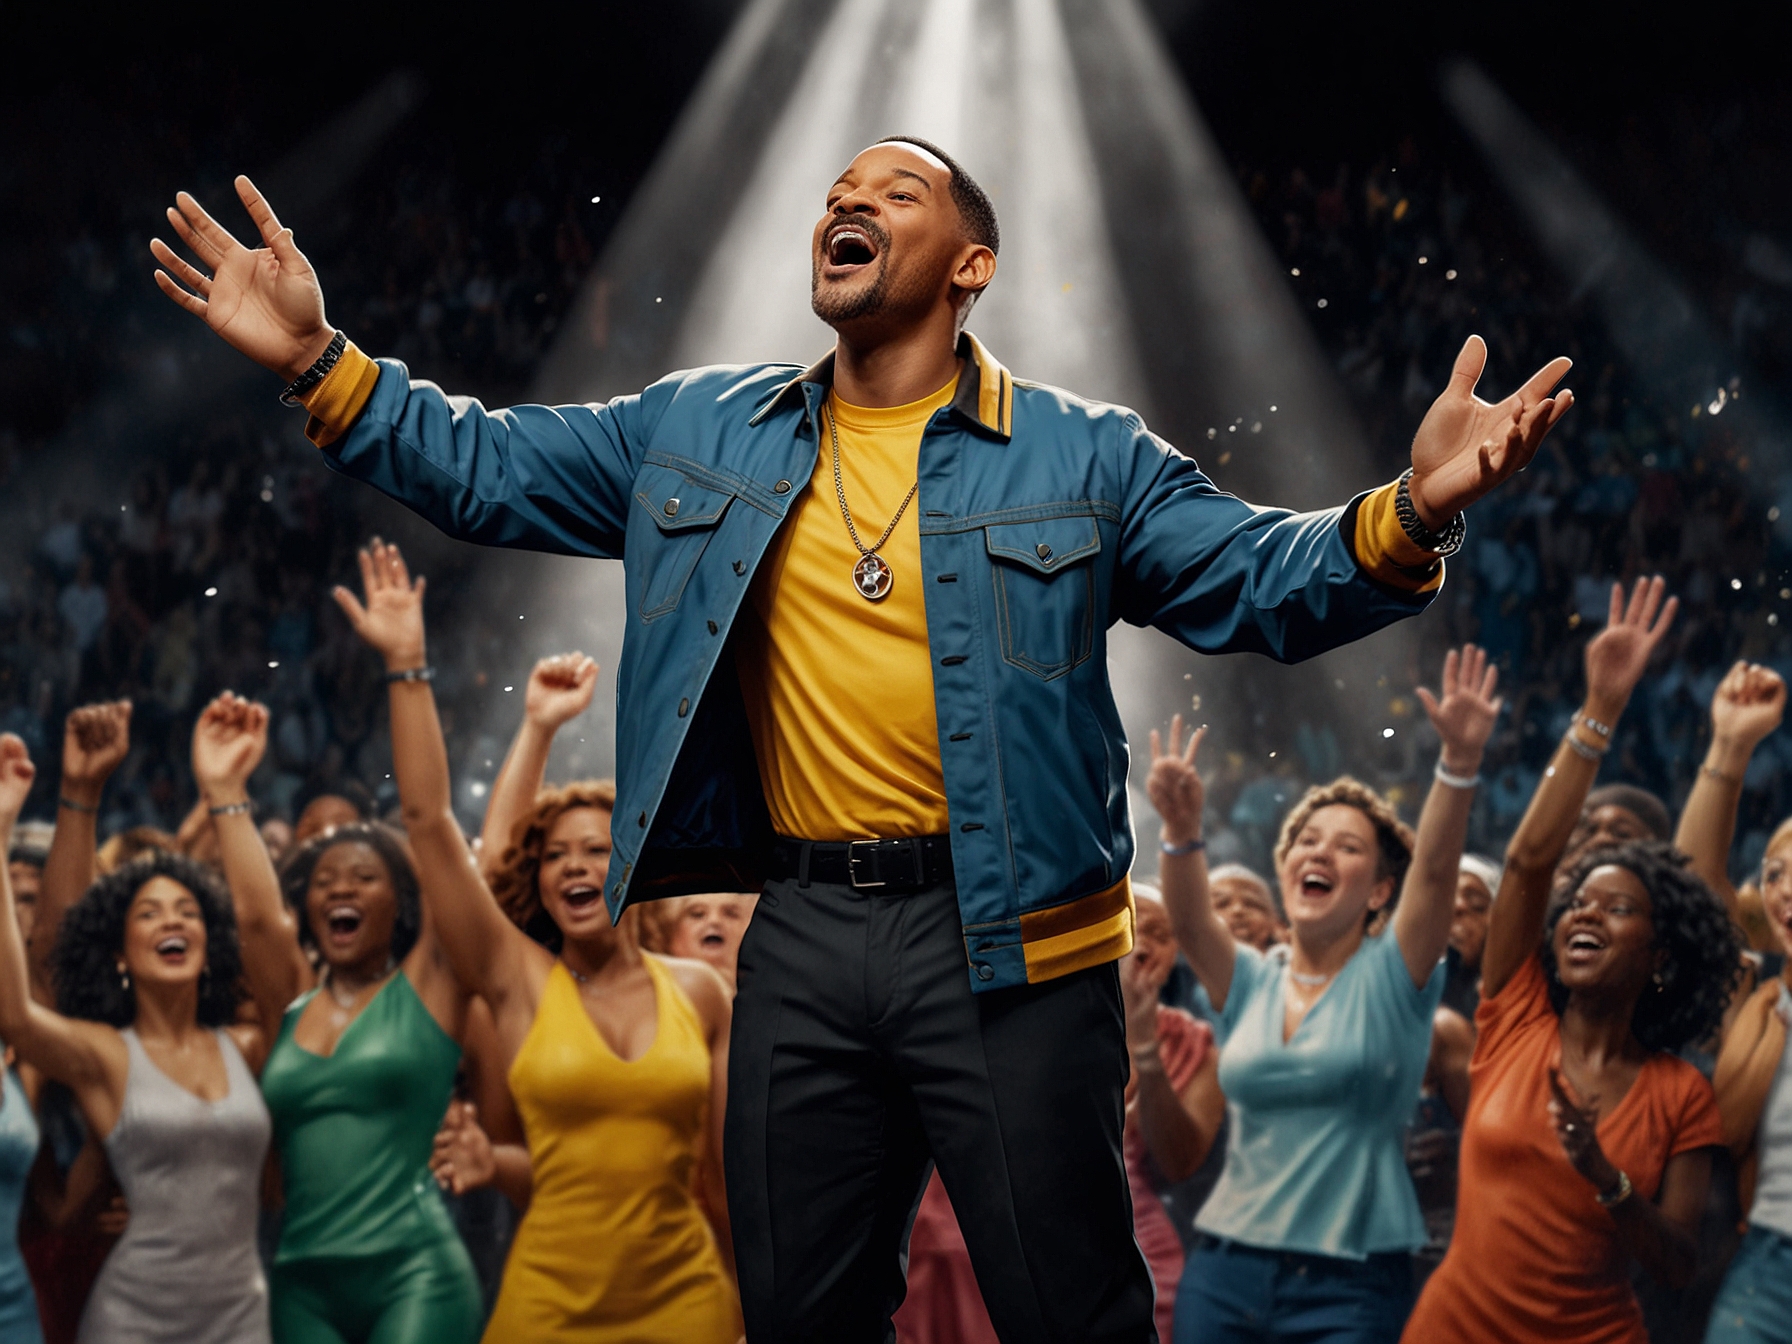 Will Smith on stage at the BET Awards, energetically performing his new song, with a vibrant, cheering audience highlighting his triumphant return to the music scene.